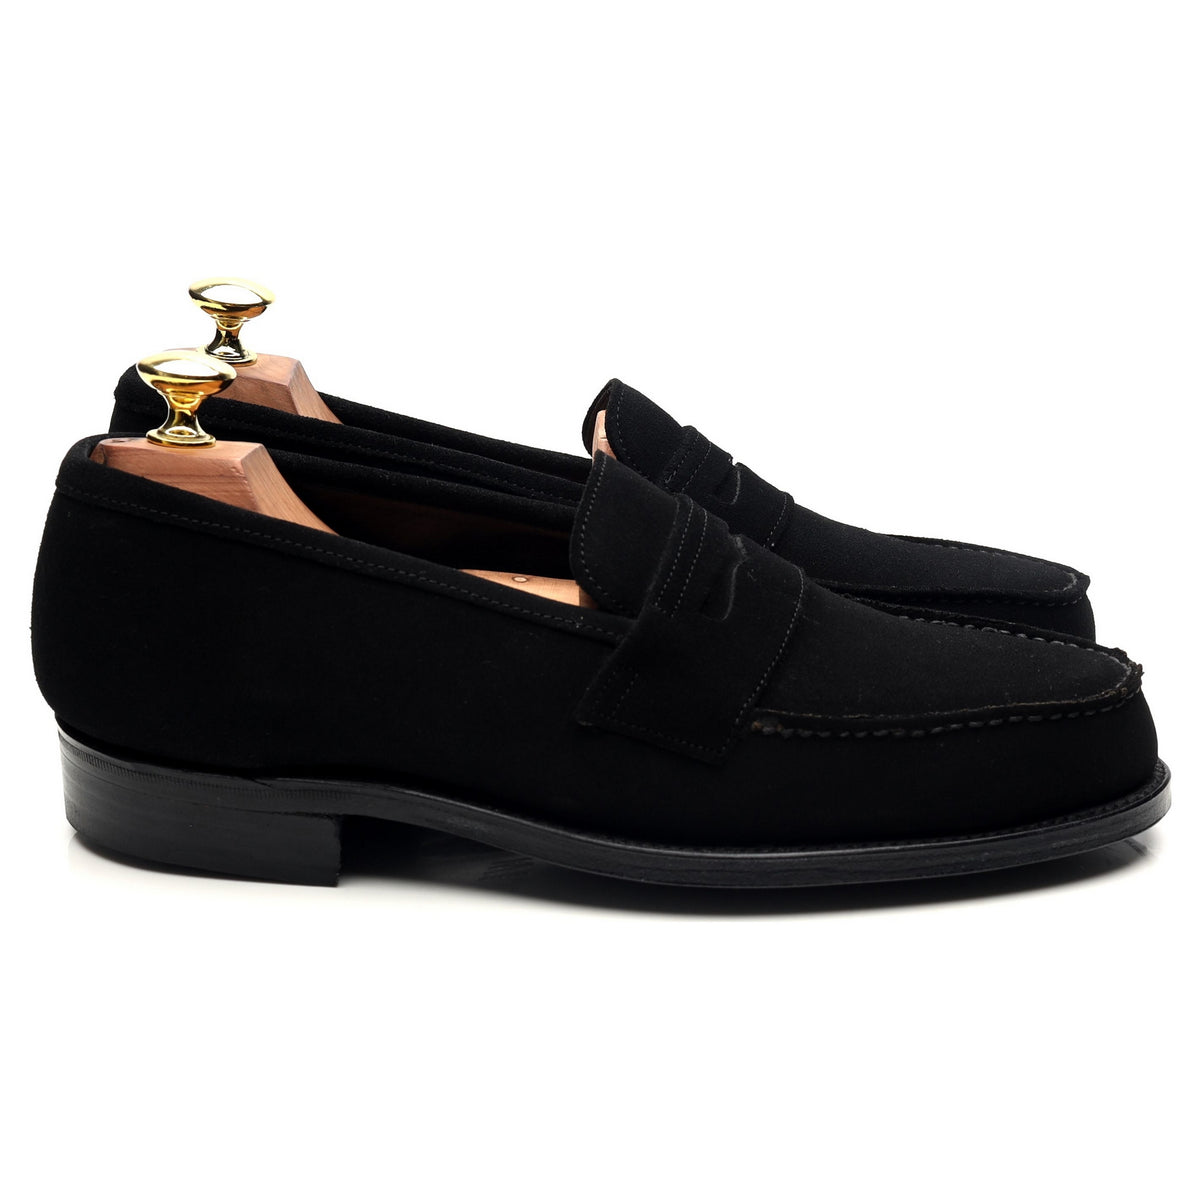 &#39;Whisky + Women&#39; Black Suede Loafers UK 7